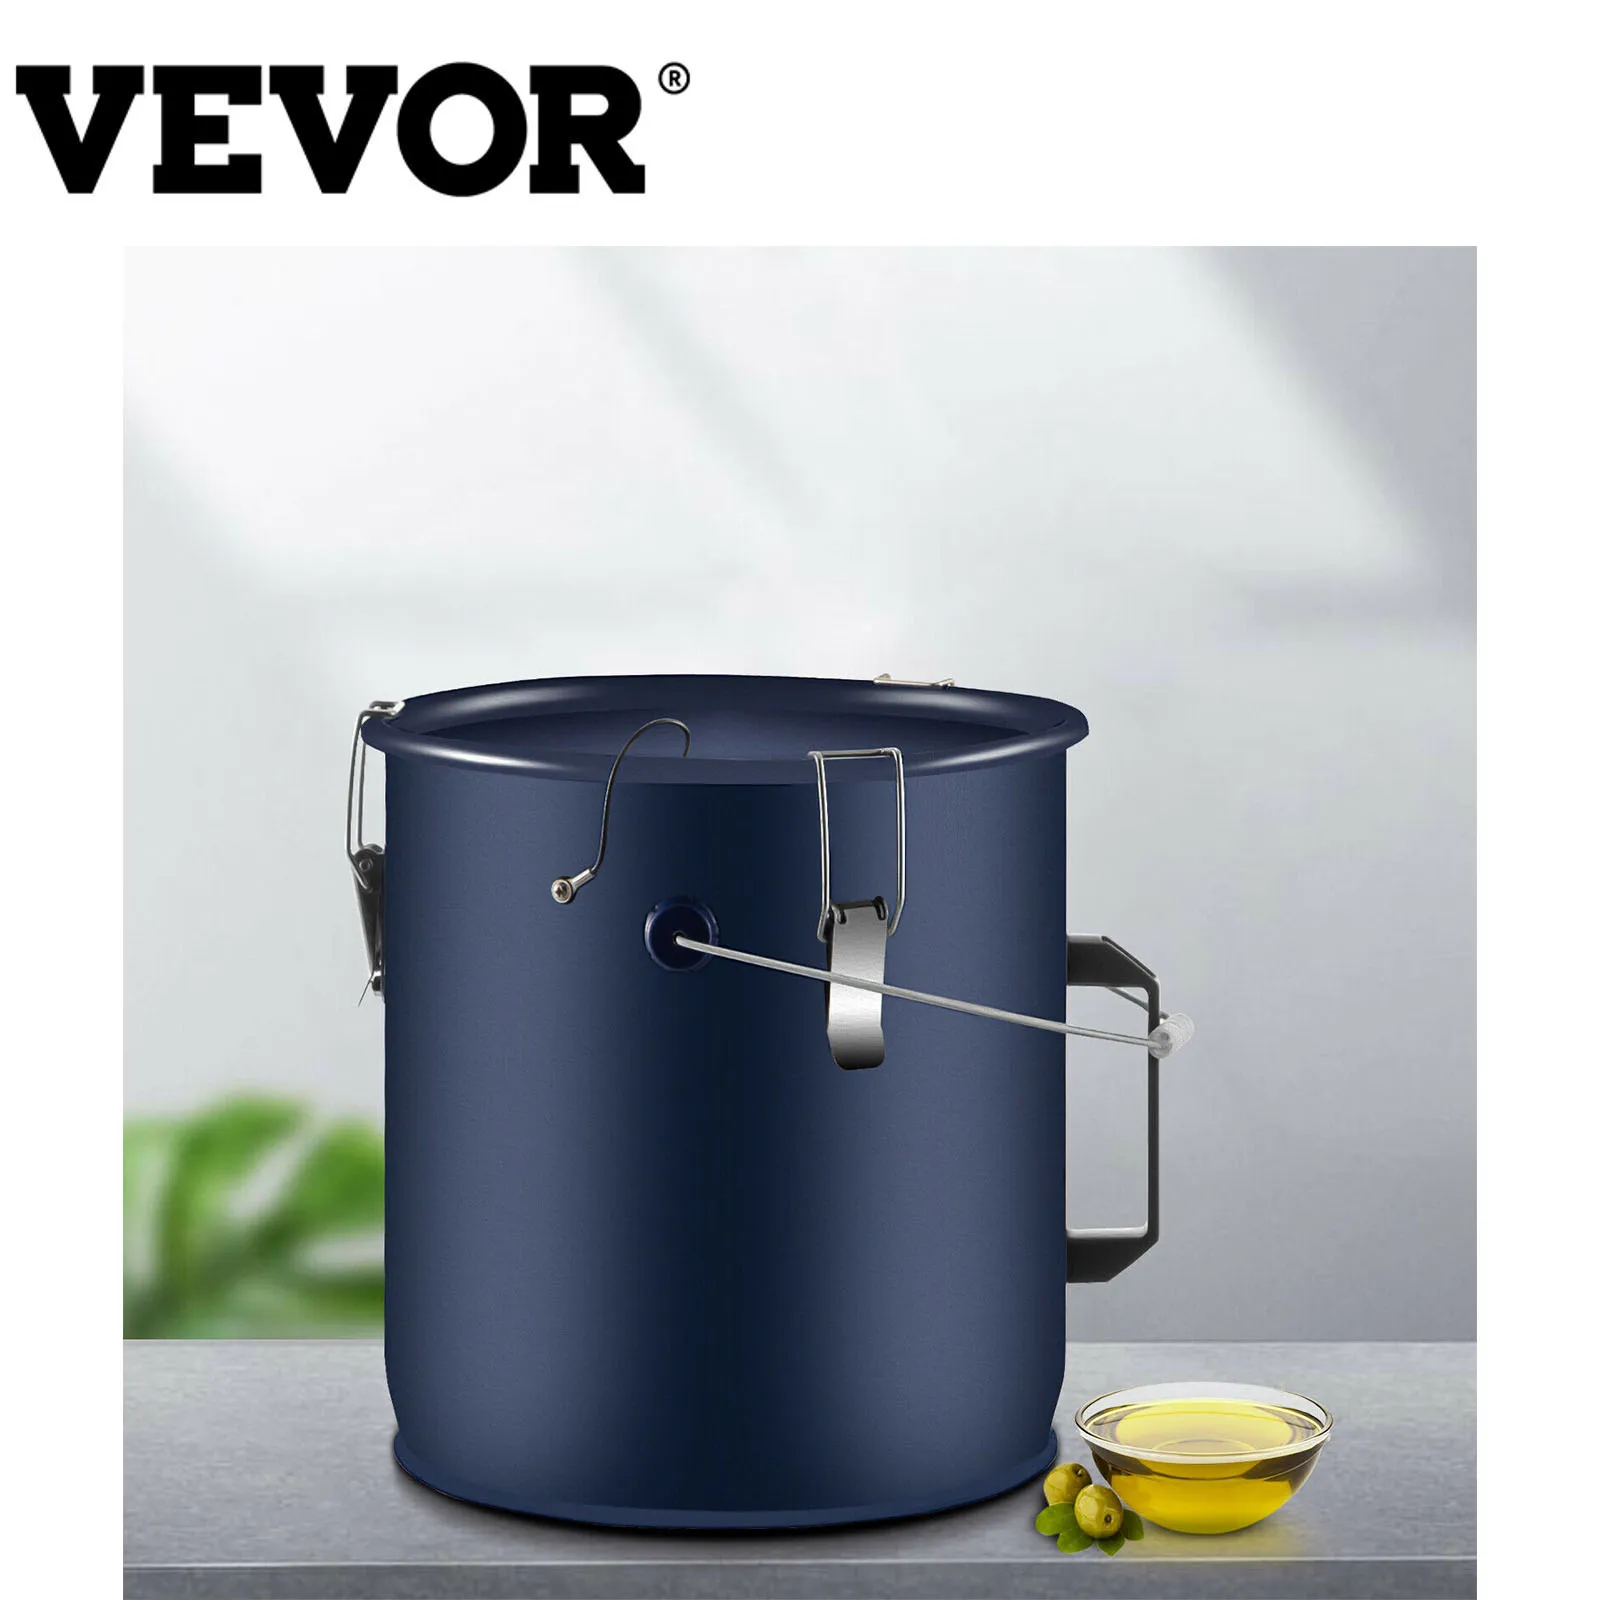 

VEVOR 6/8/10 Gal Fryer Grease Bucket Oil Disposal Caddy W/ Lid&Filter Bag Thickened Steel Durable for Kitchen Commercial Use